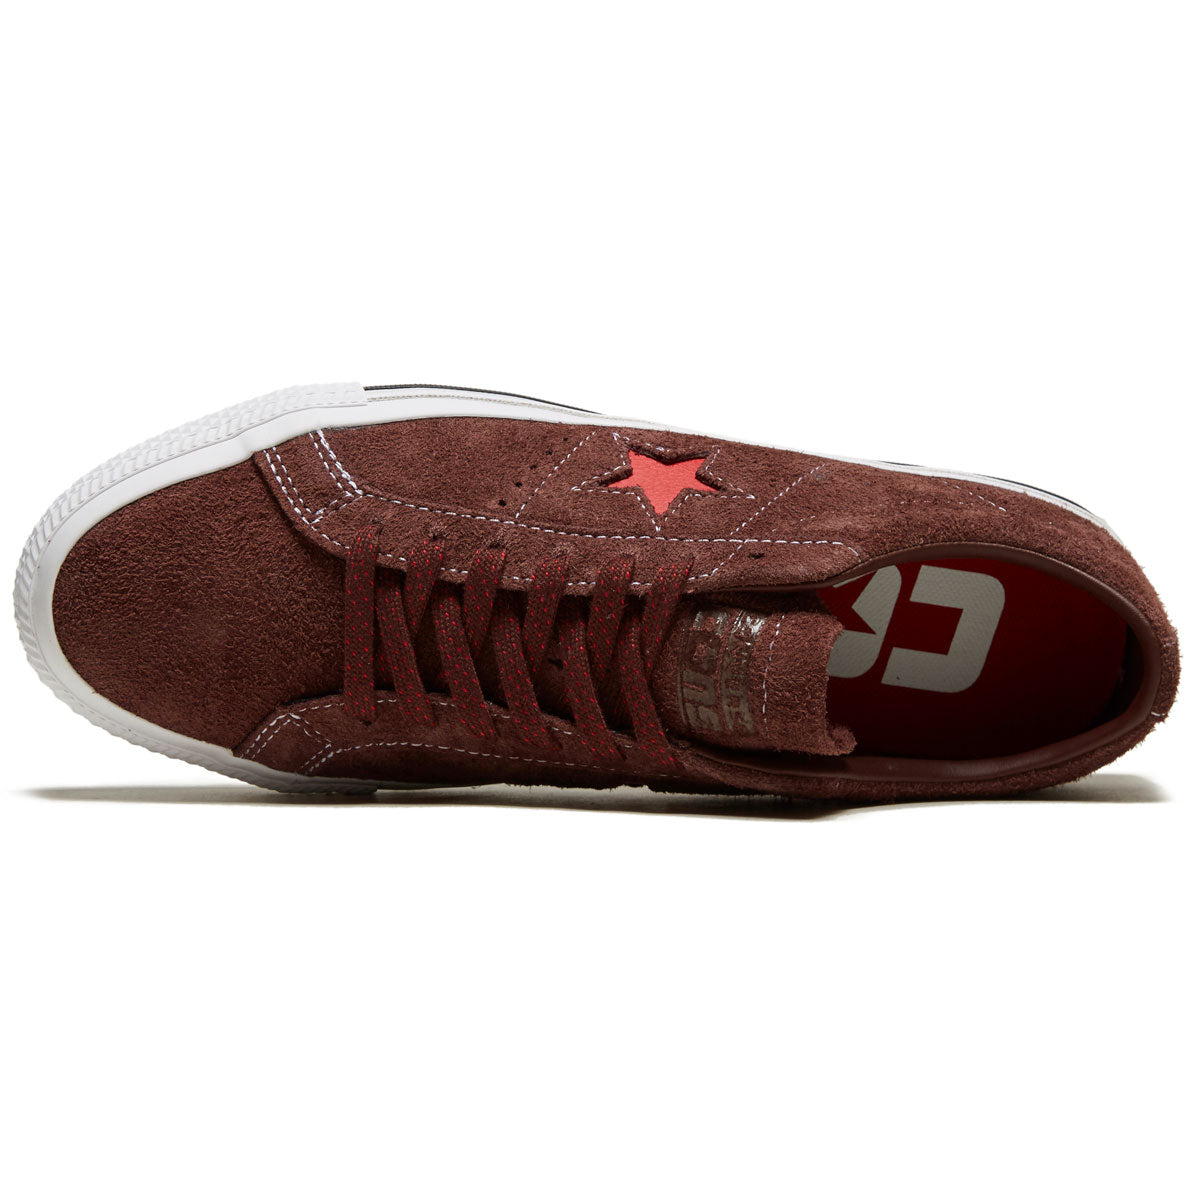 Converse One Star Pro Ox Shoes - Eternal Earth/White/Red image 3